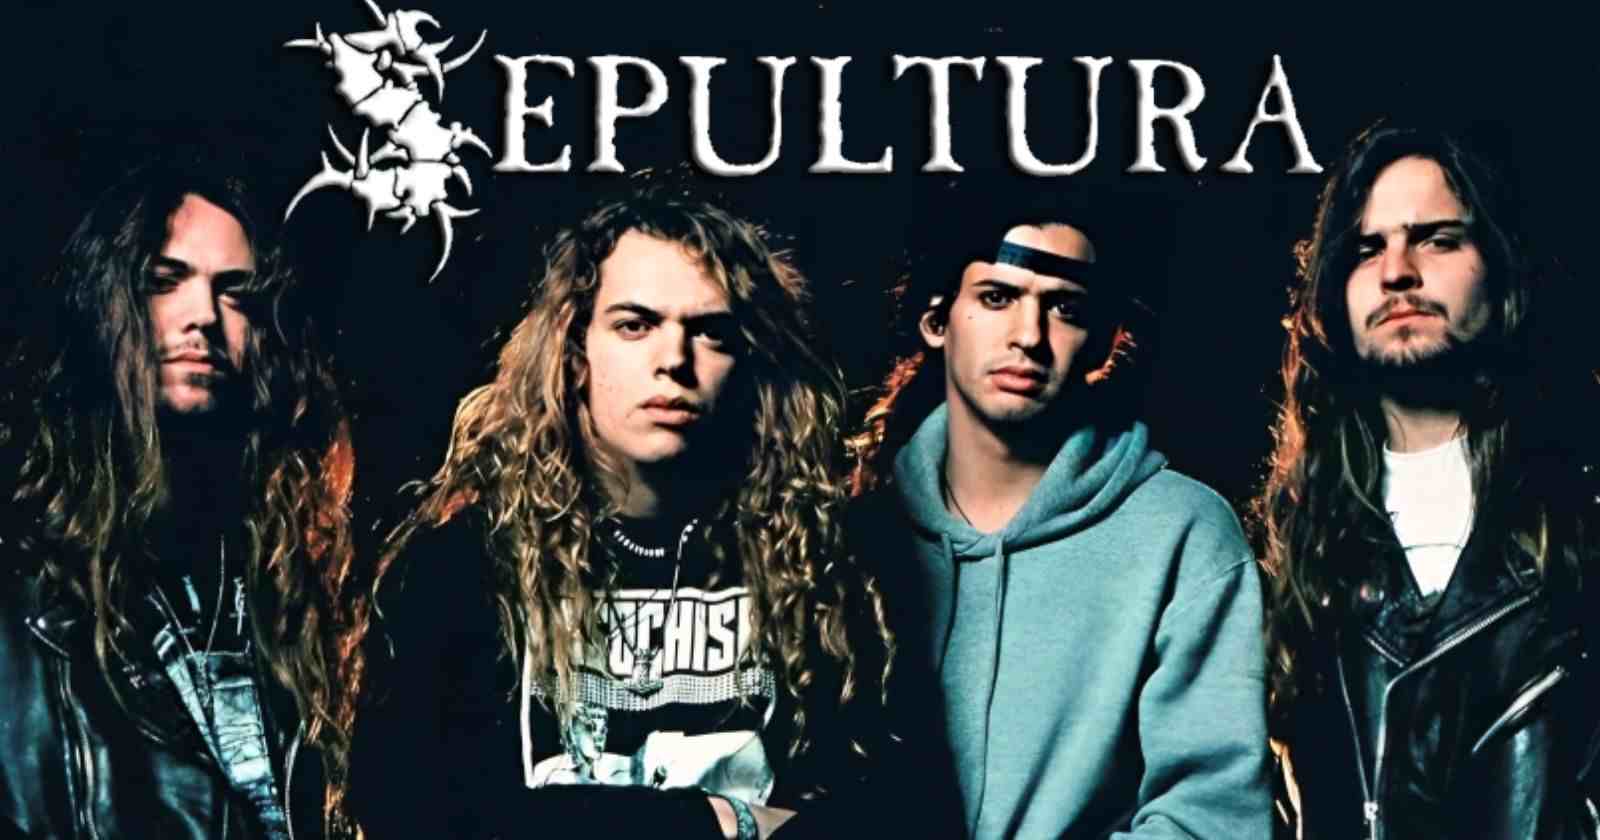 Sepultura in the 90s